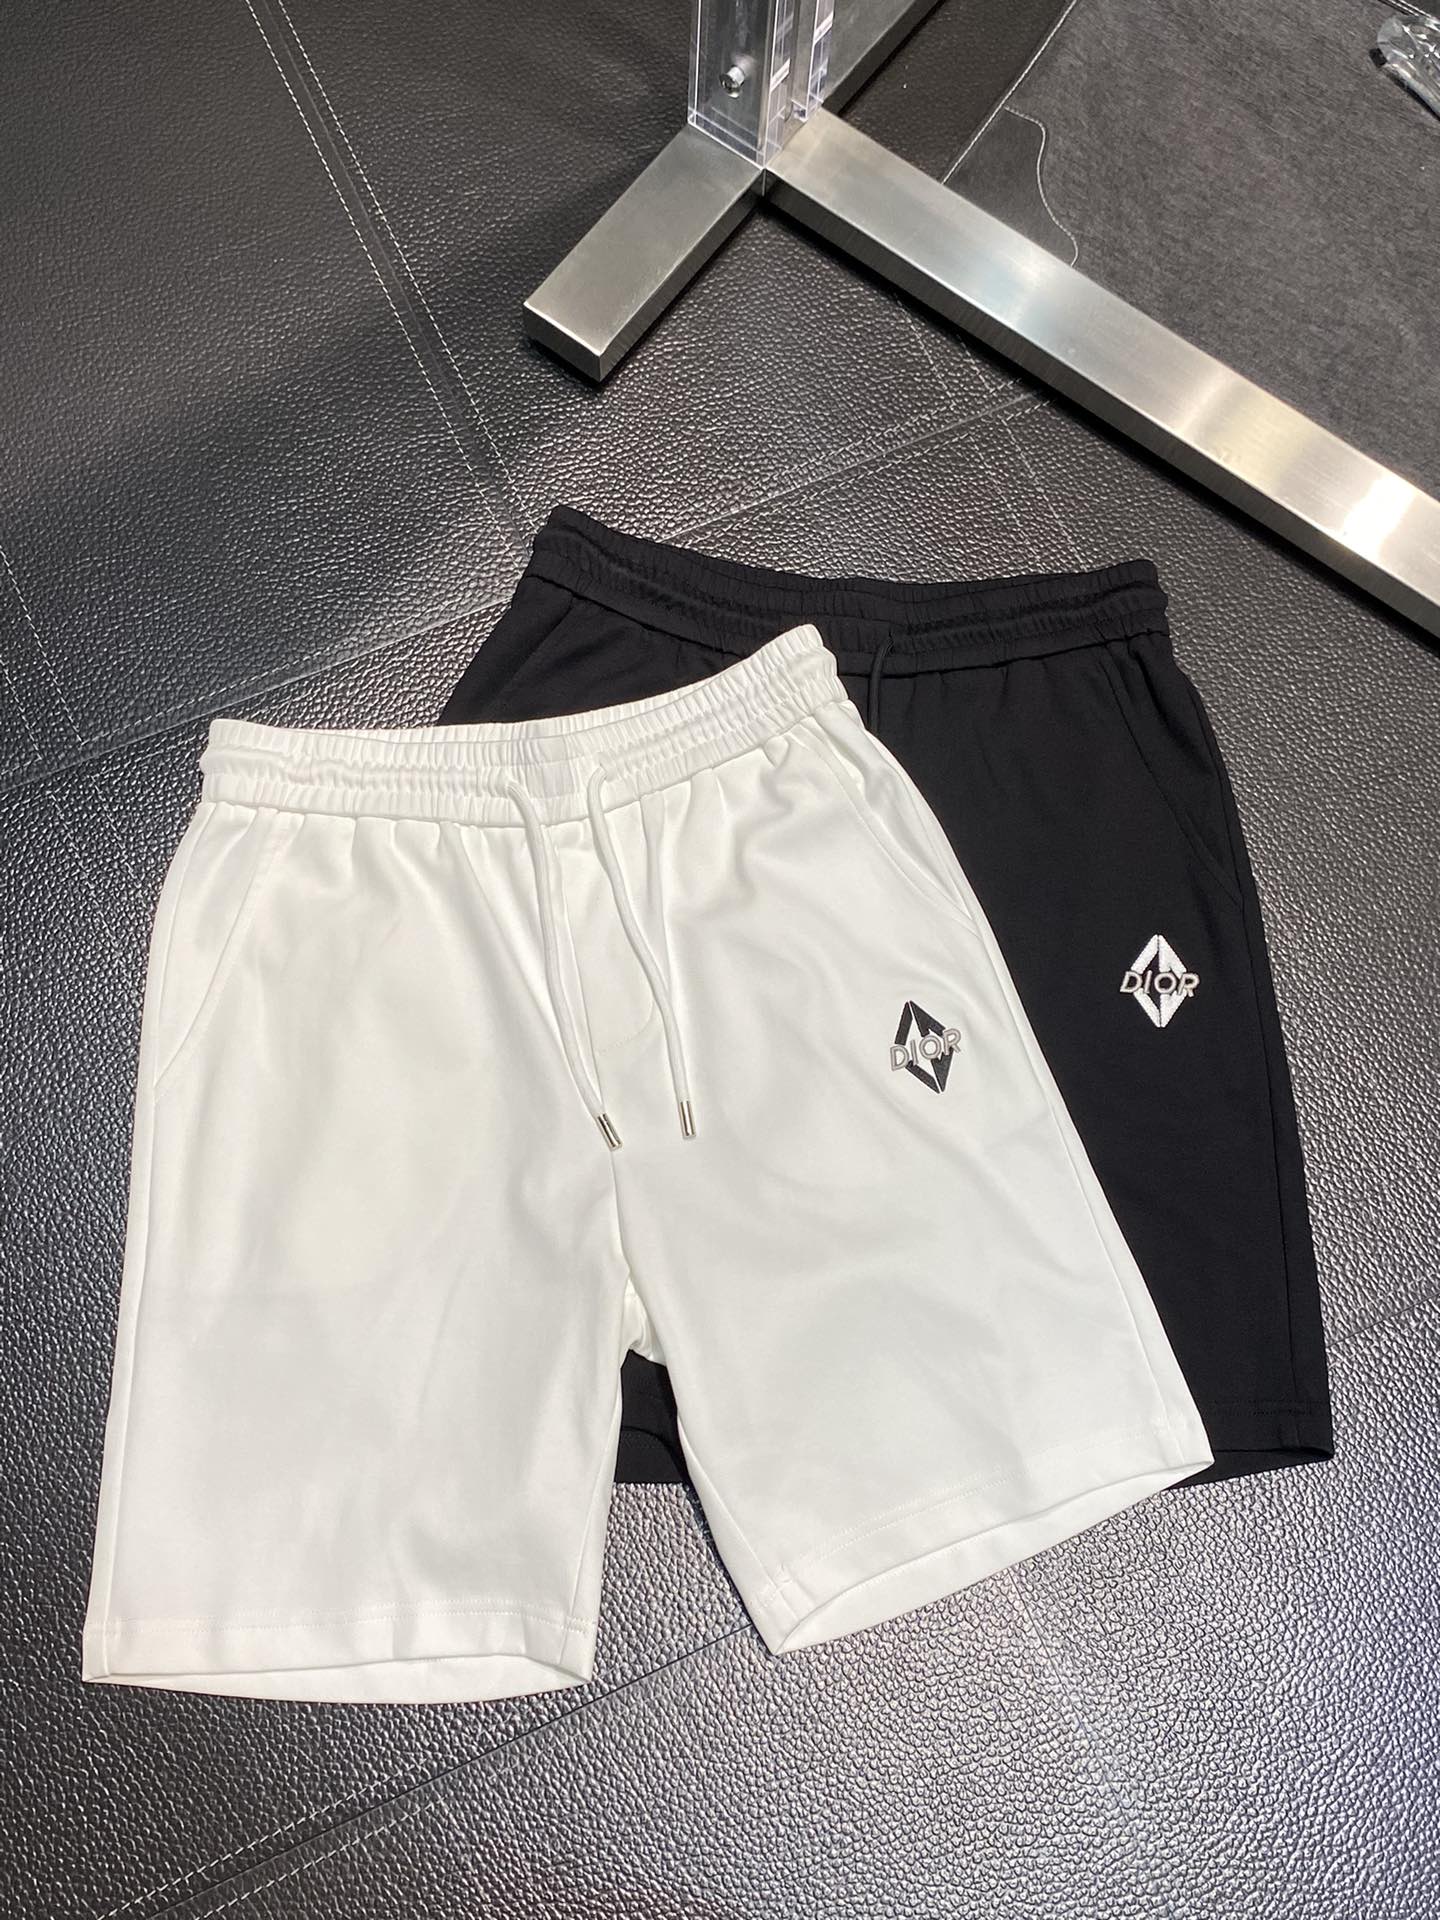 Dior Clothing Shorts Online Store
 Casual